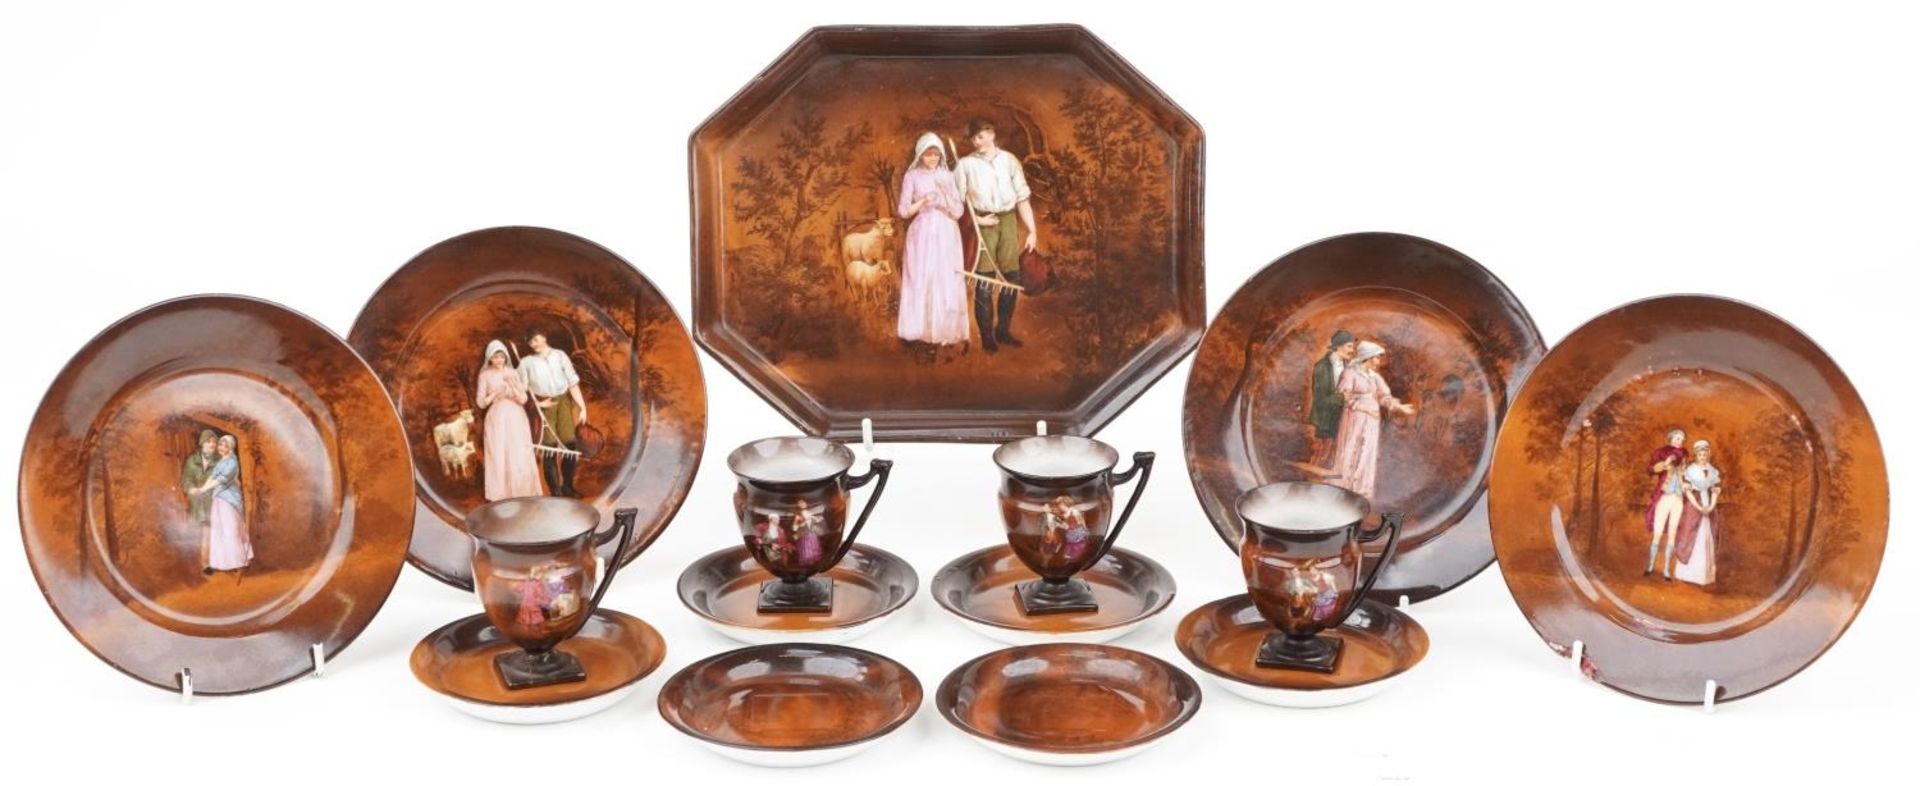 German Sylvia porcelain teaware including various plates and cups decorated with figures, the